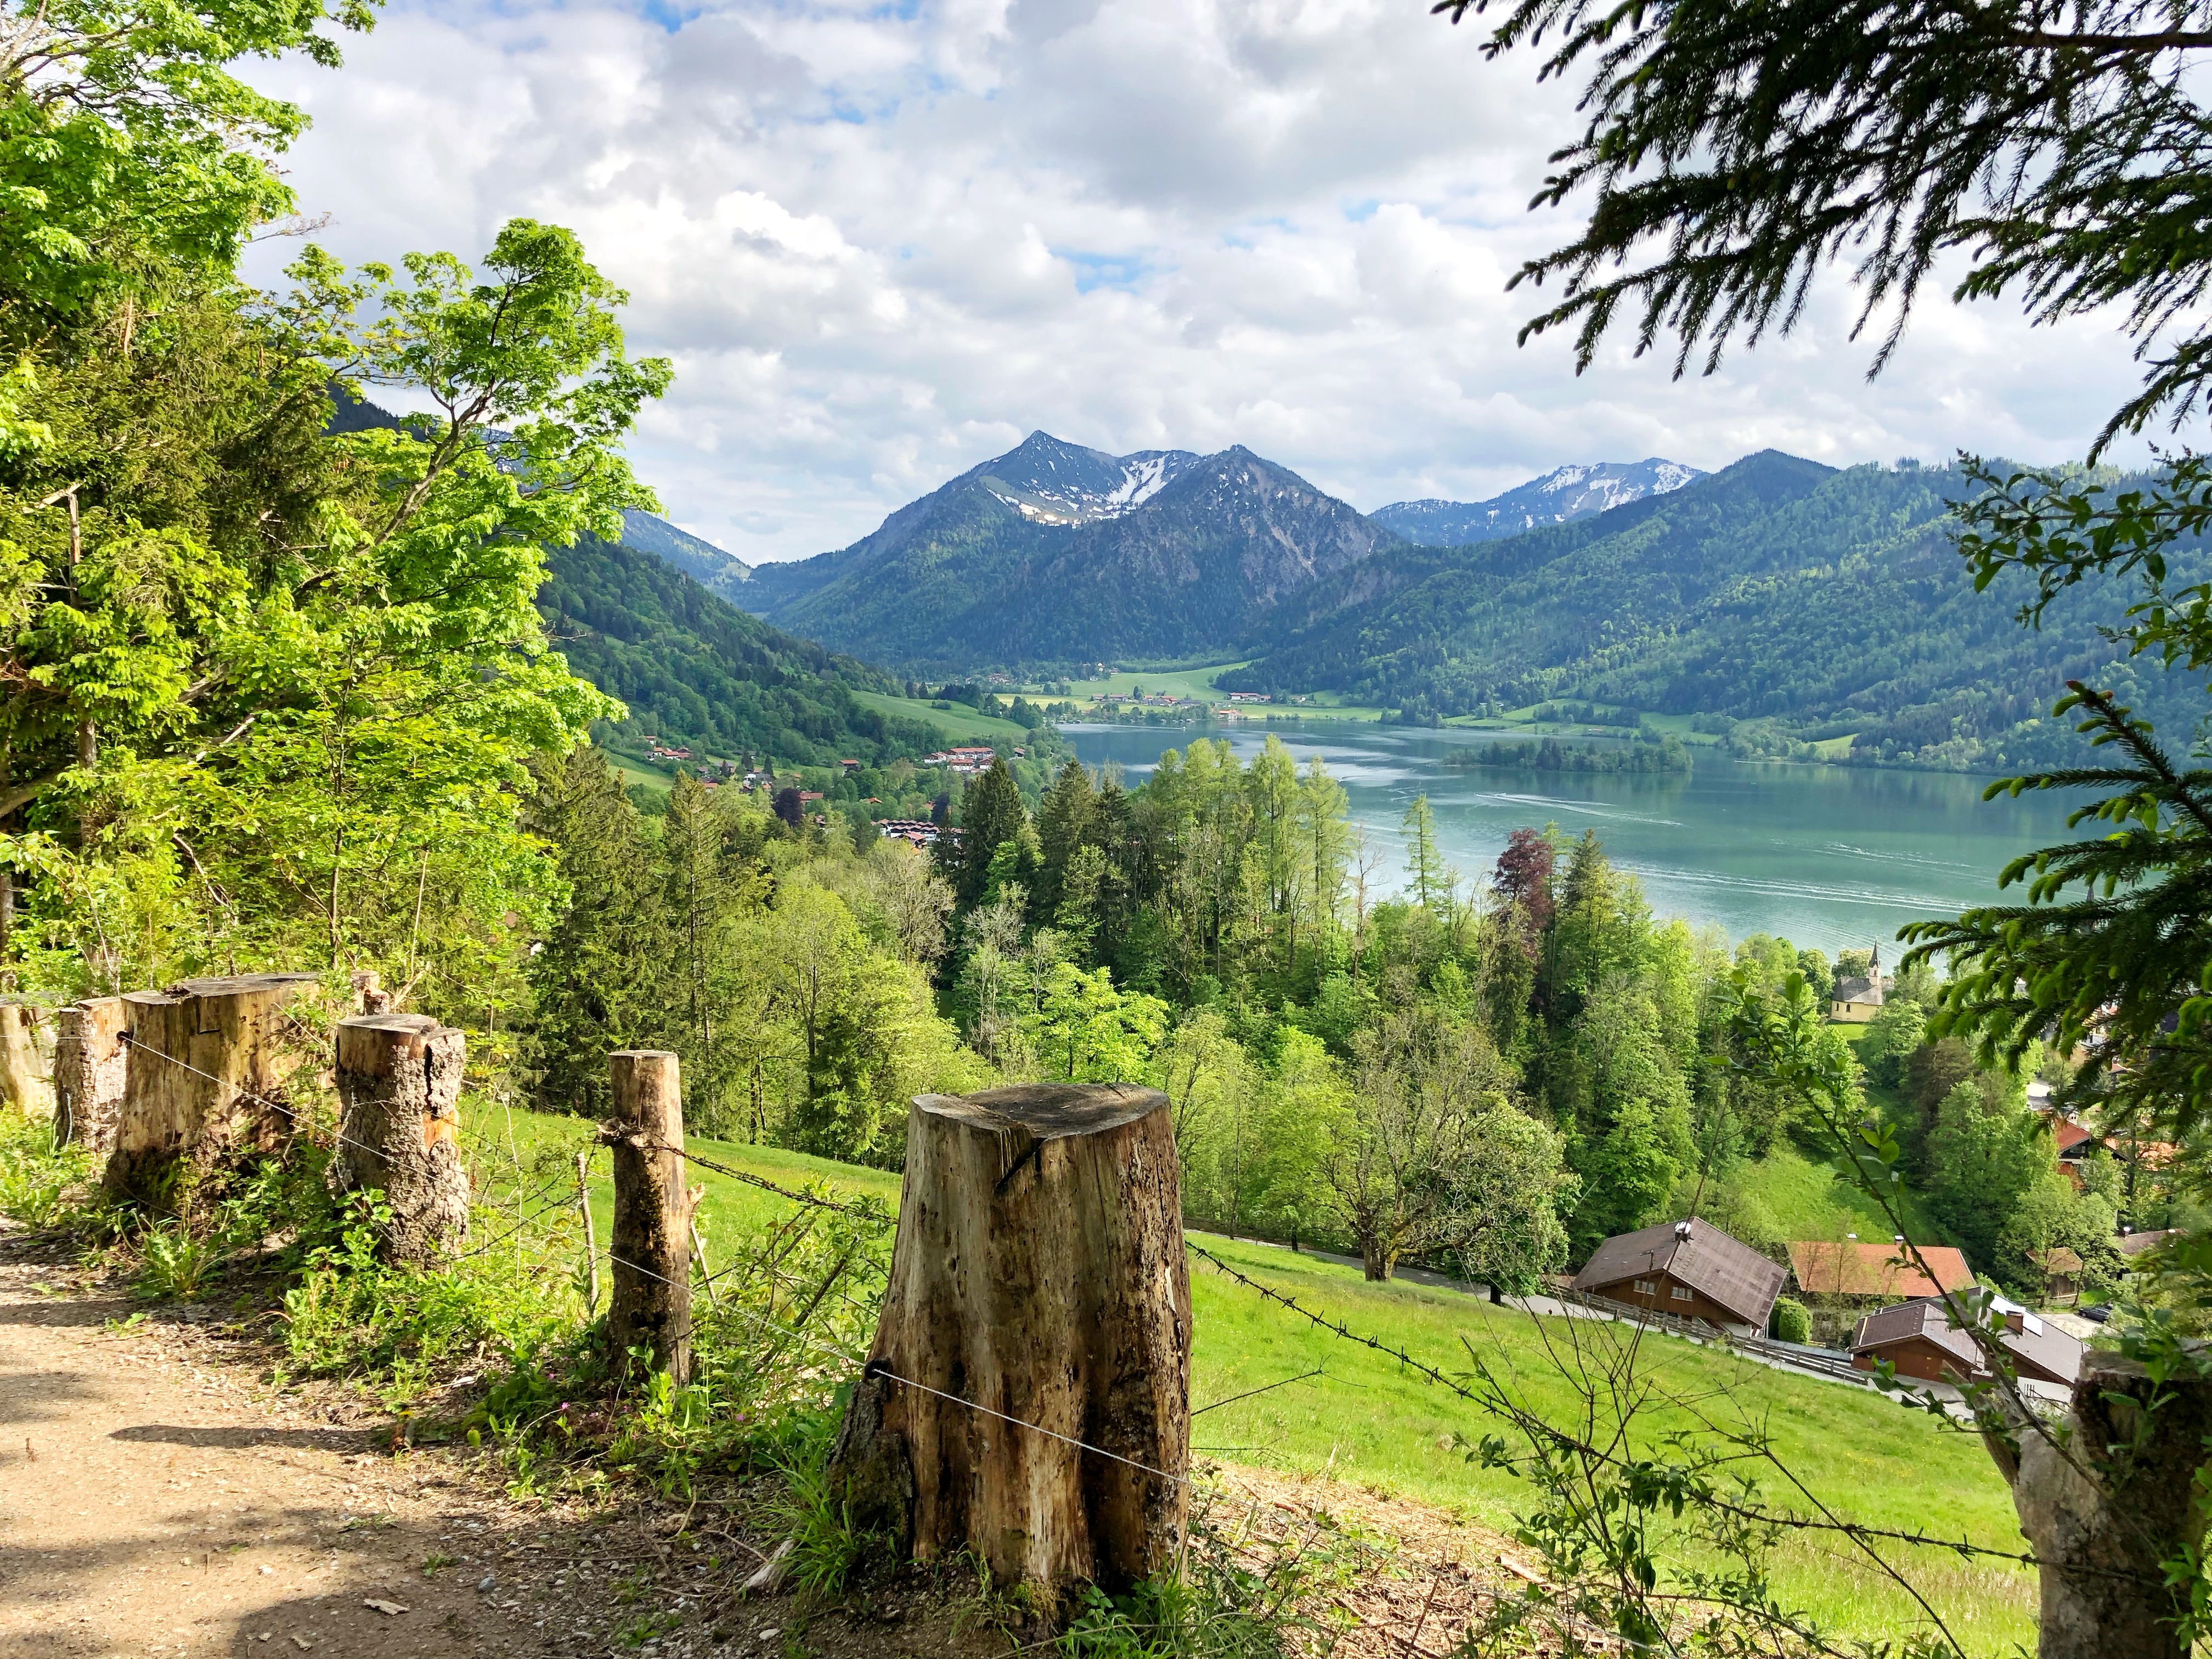 A Week in Schliersee Hiking In The Bavarian Alps (Germany